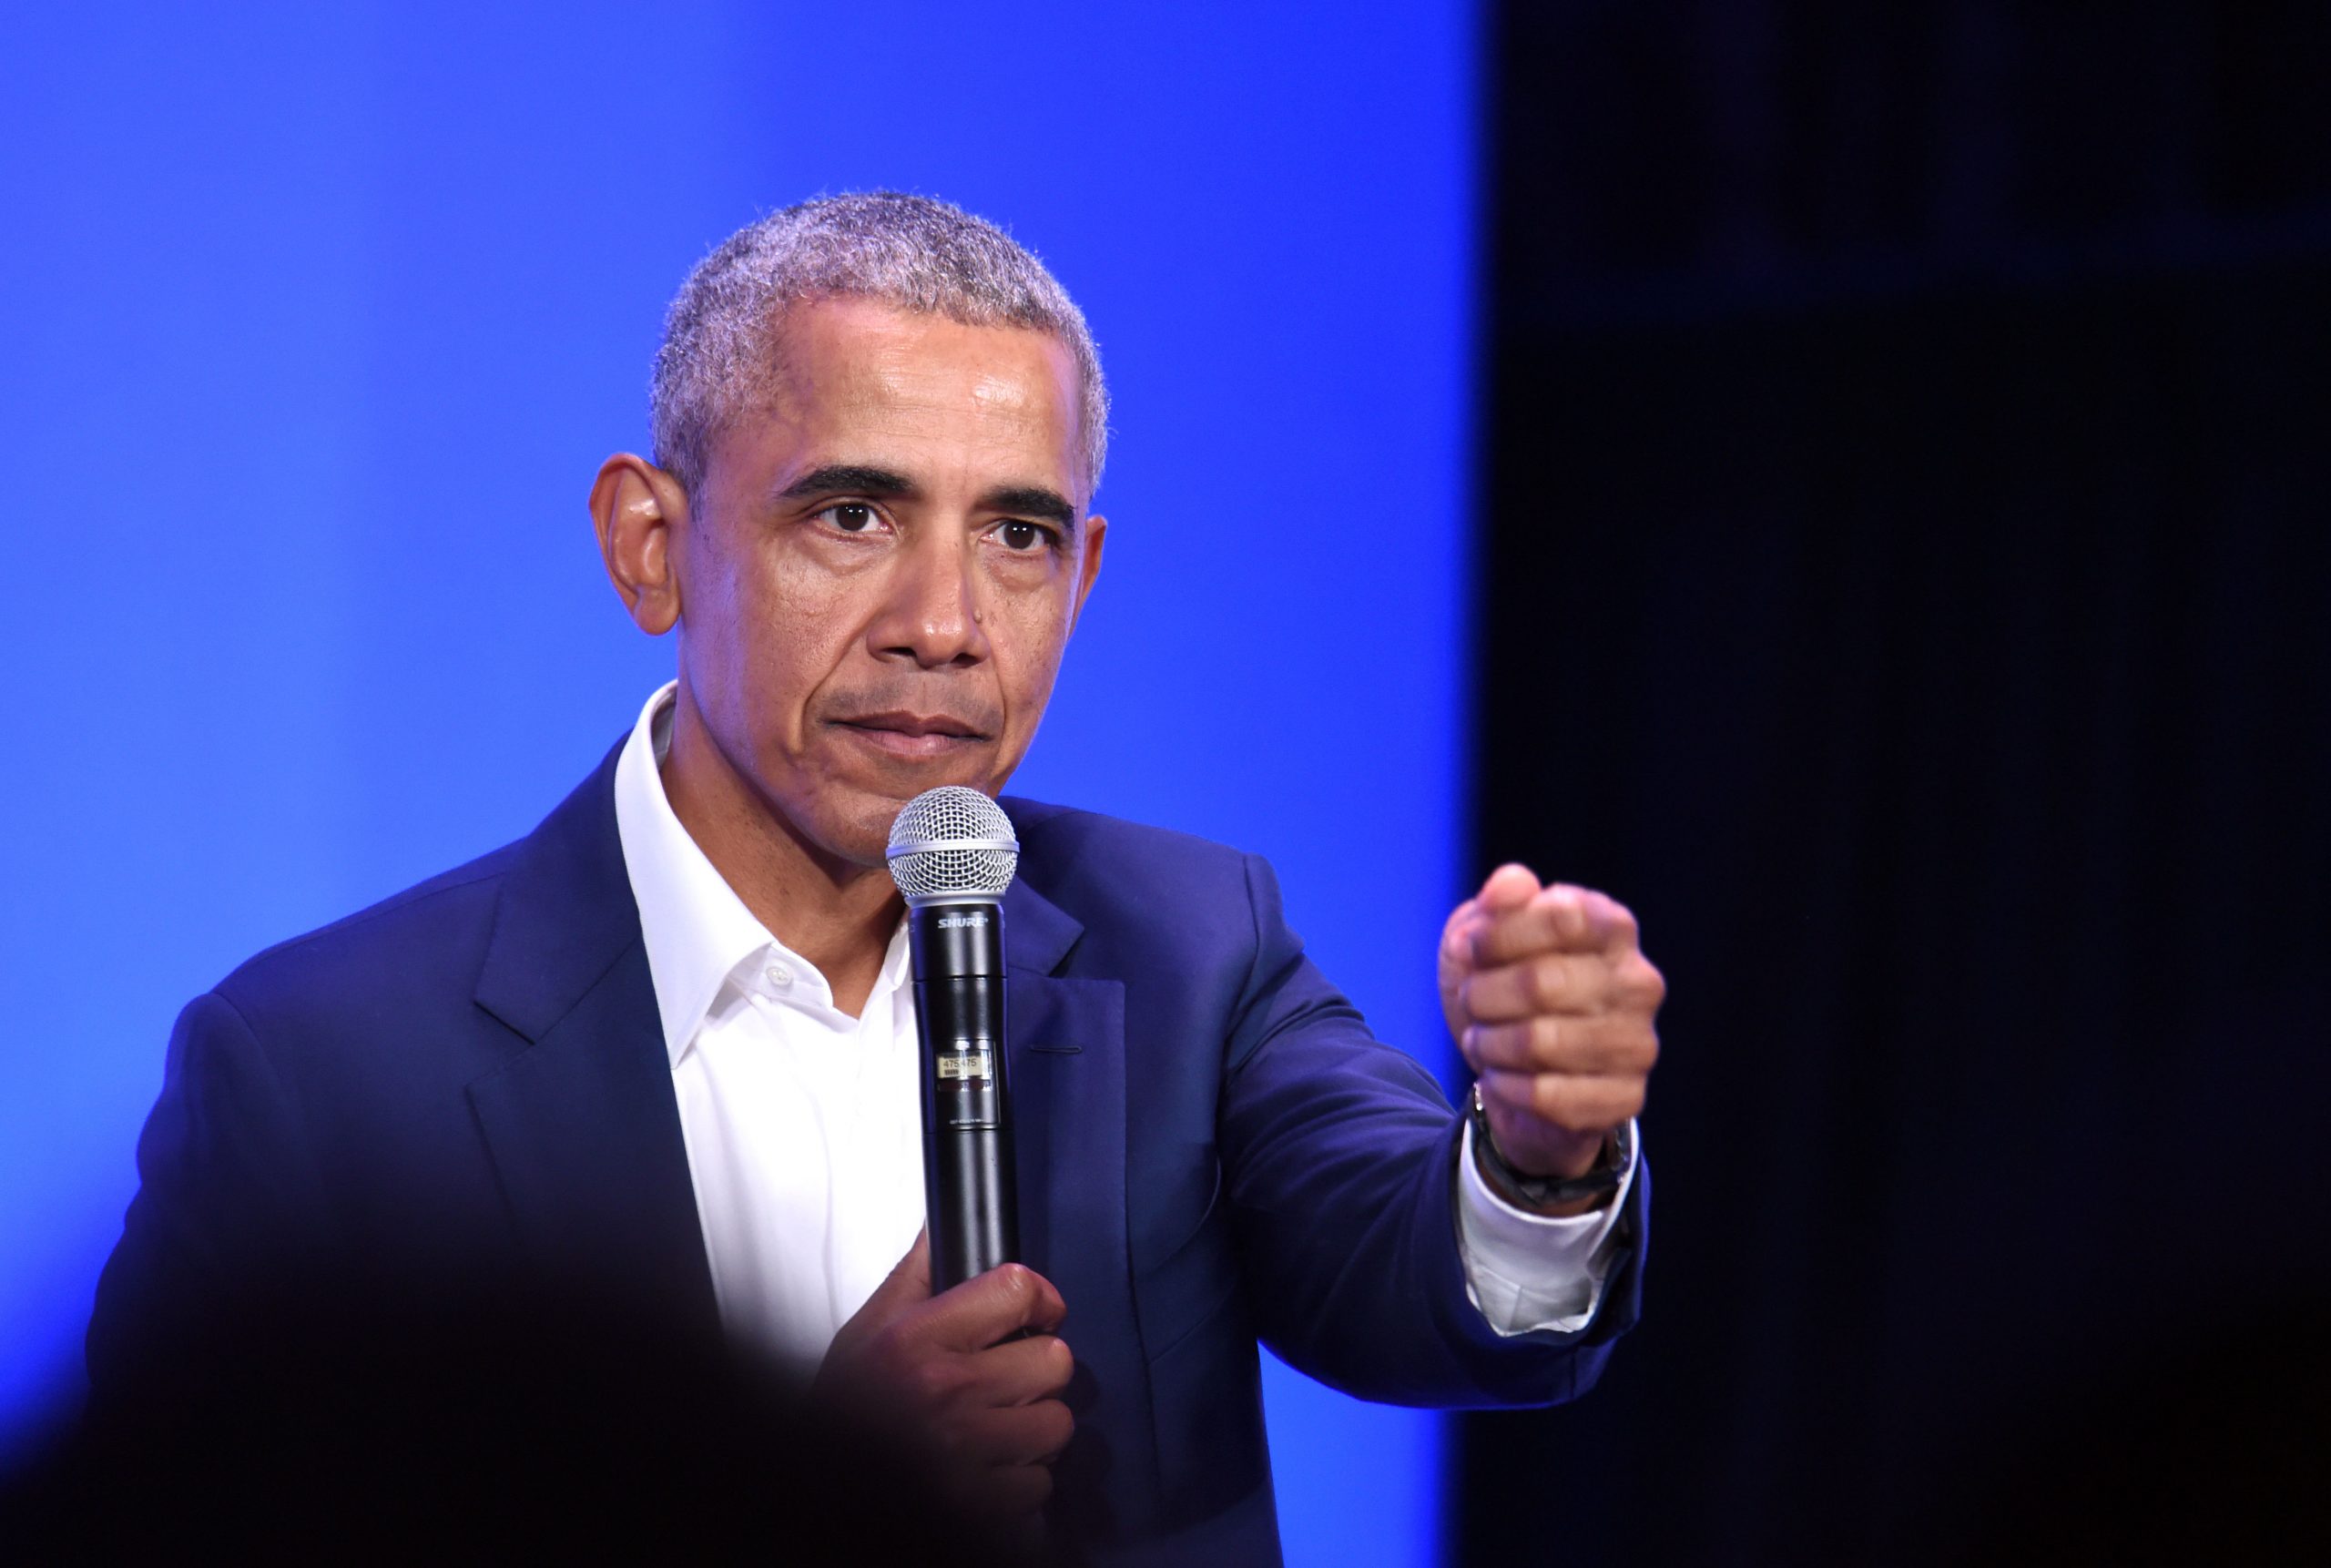 Barack Obama scales back 60th birthday party amid surge in COVID cases